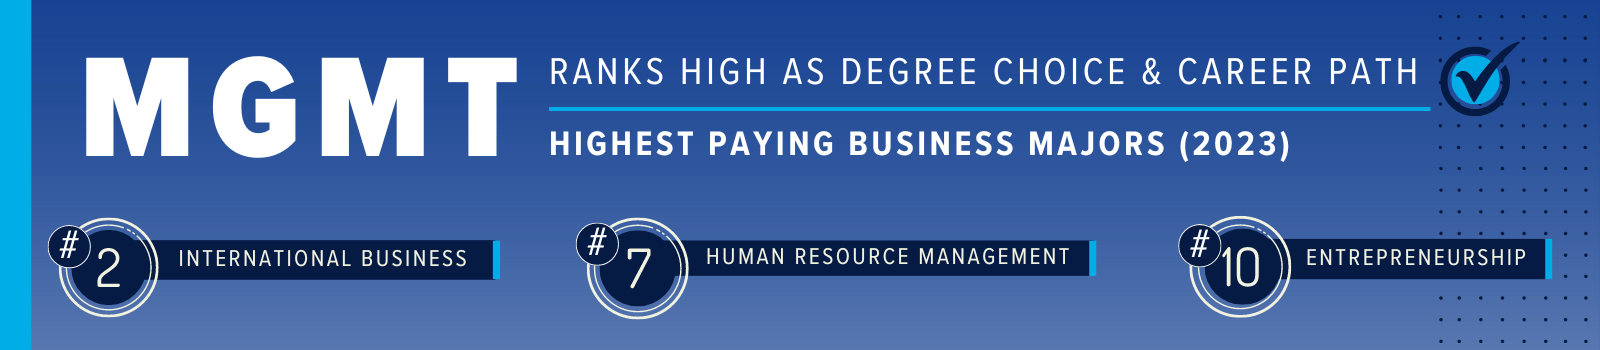 Management ranks high as degre choice and career path.